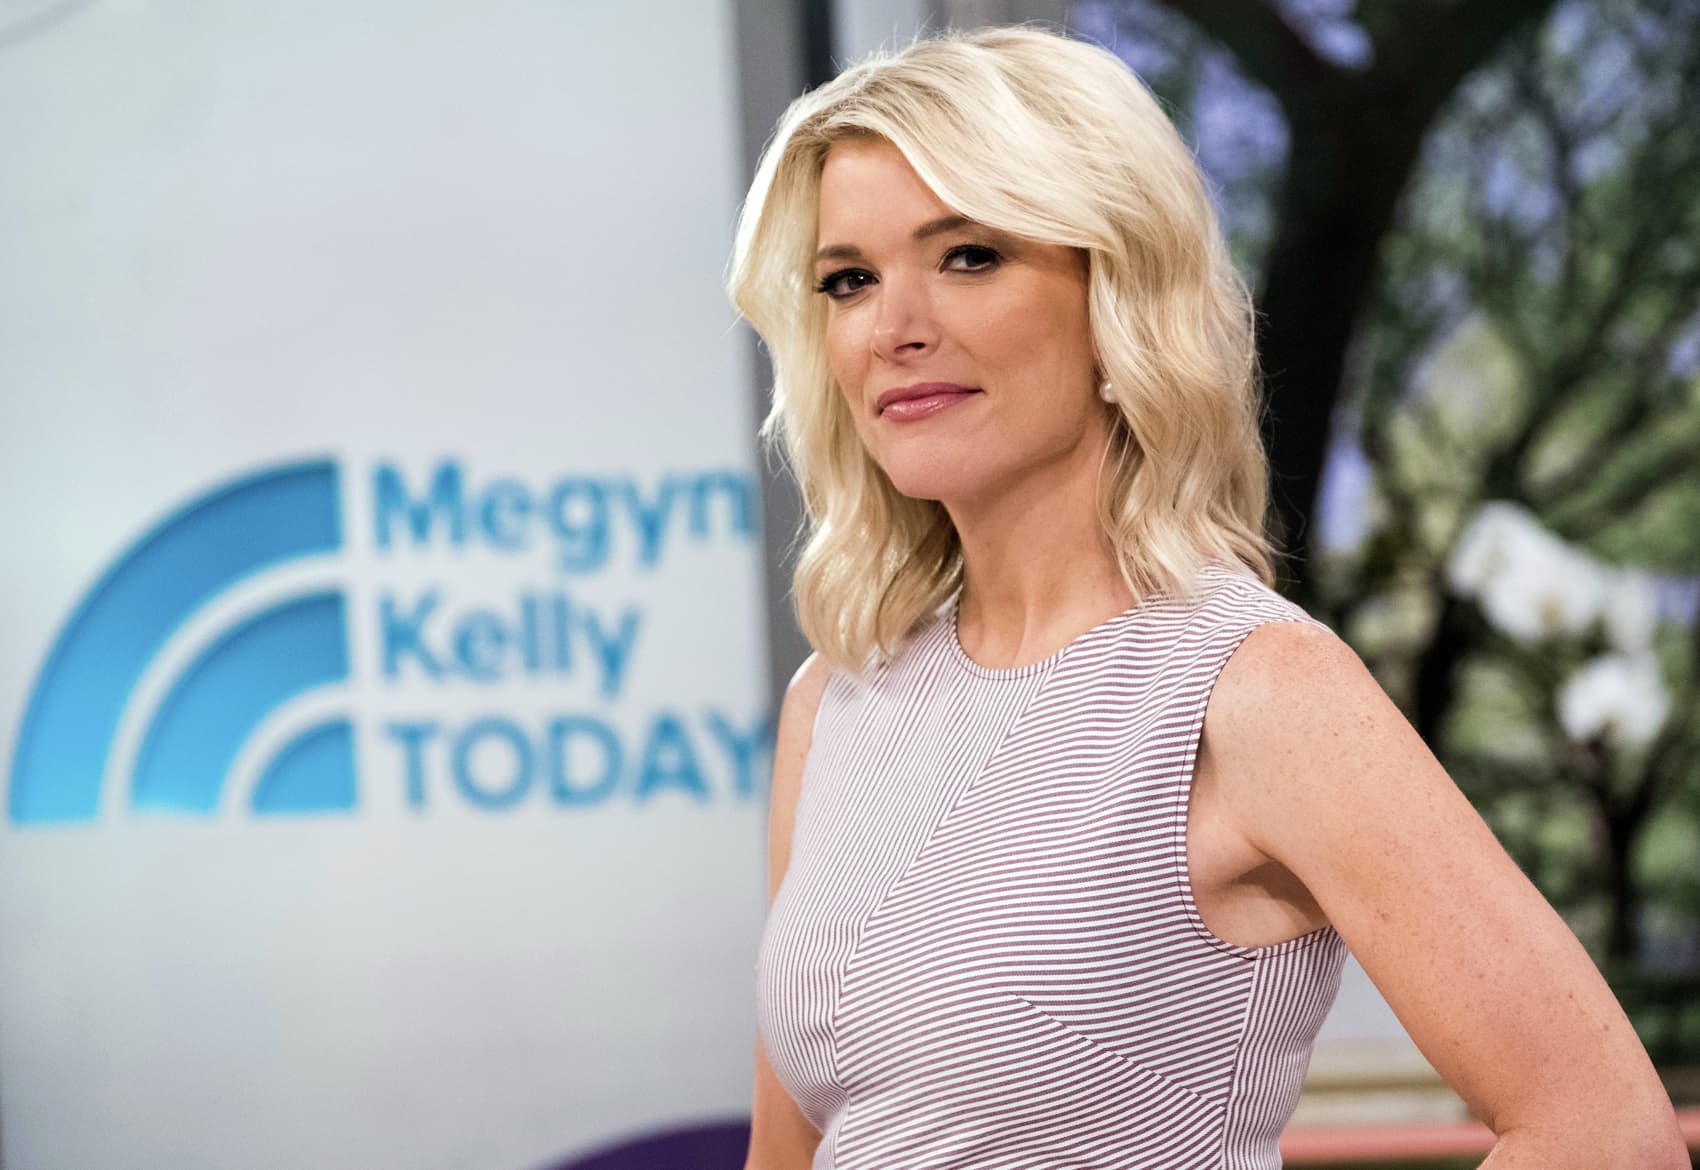 Megyn Kelly Makes Rocky Debut On NBC Morning Show | Here & Now